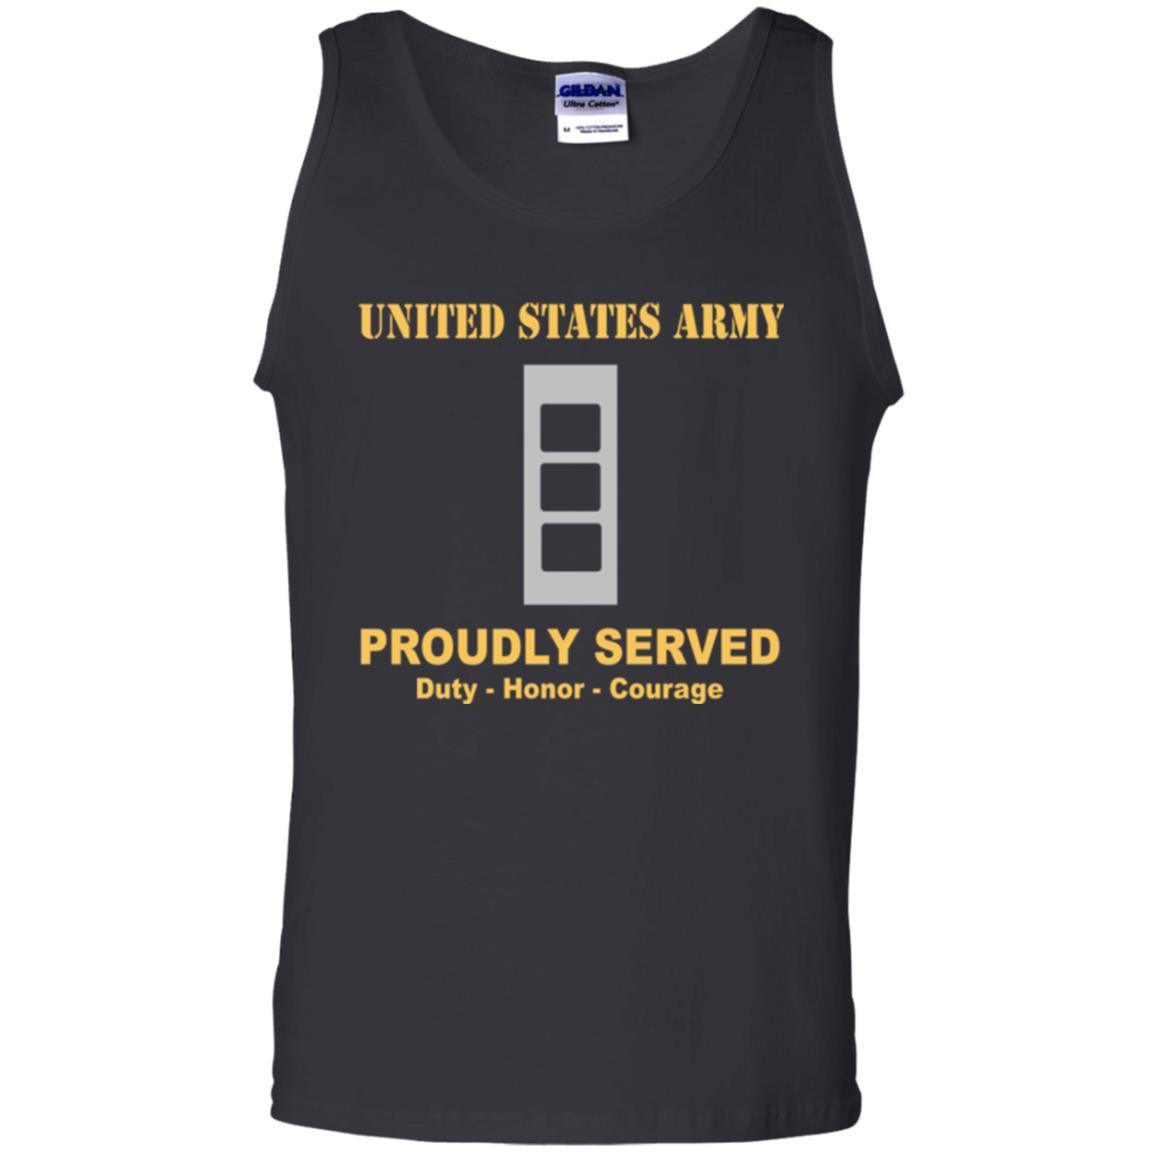 US Army W-3 Chief Warrant Officer 3 W3 CW3 Warrant Officer Ranks Men Front Shirt US Army Rank-TShirt-Army-Veterans Nation